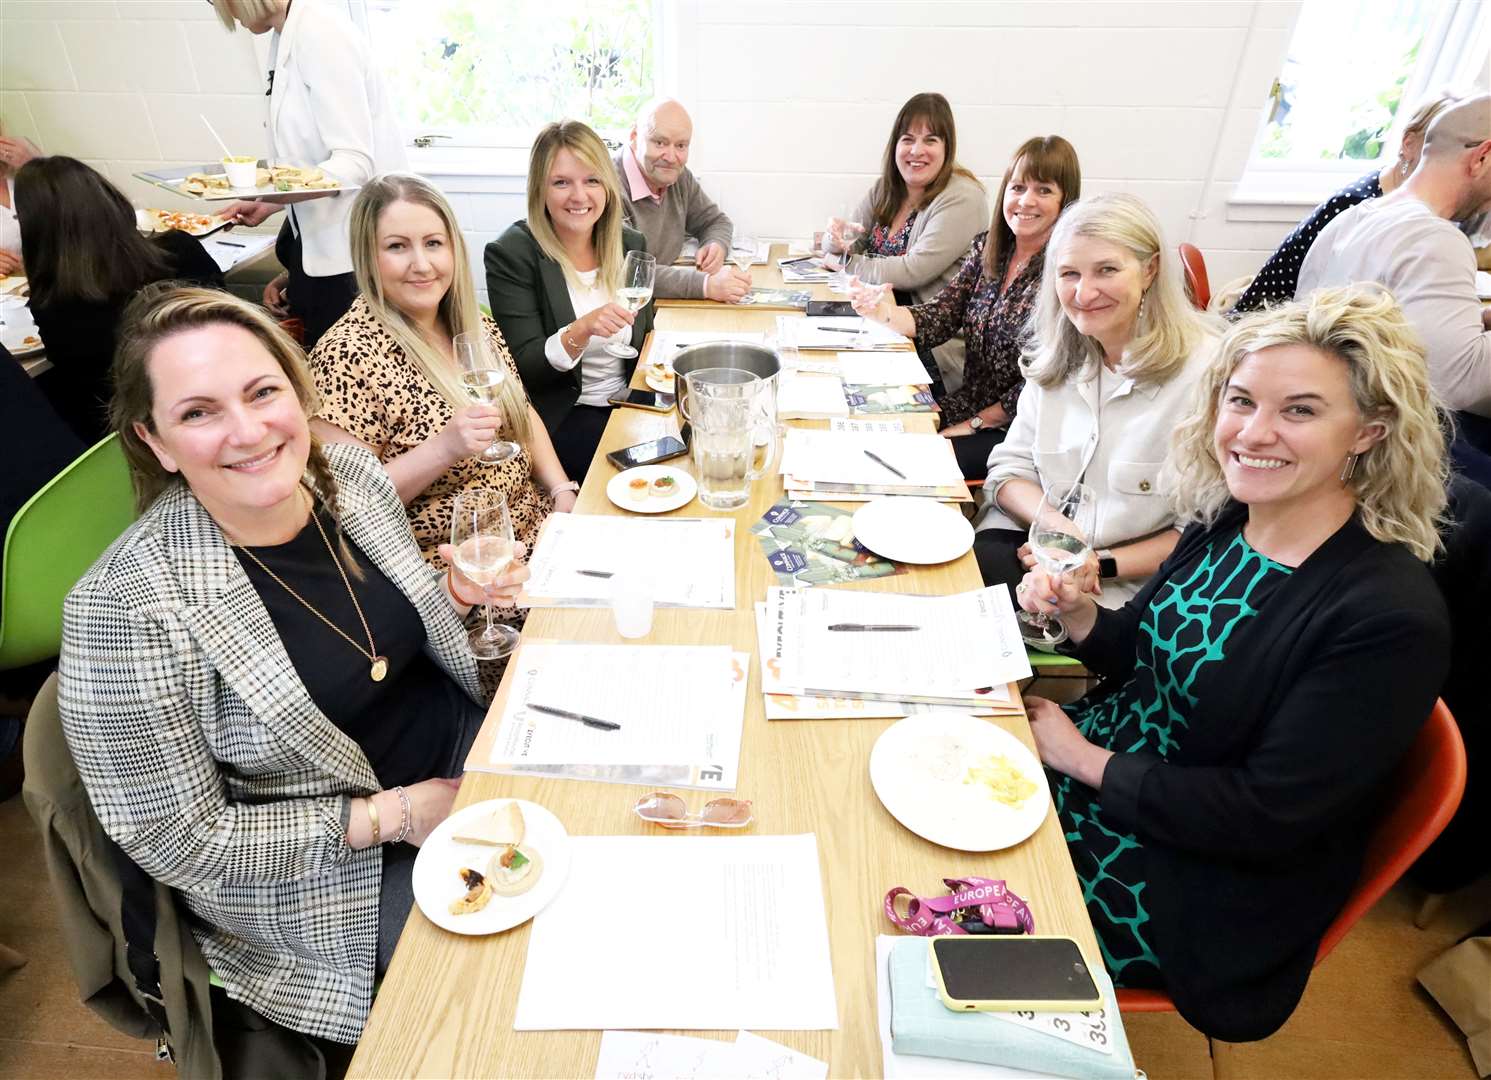 Cheese and wine night at the Inverness Botanic Garden Centre to raise money for Macmillan Cancer Support: Amanda Latham, Sarah Mackay, Cecilia Grigor, Neil Macphail, Vicky Webb, Laura Munro, Sharon Asher and Sarah Francis. Picture: James Mackenzie.